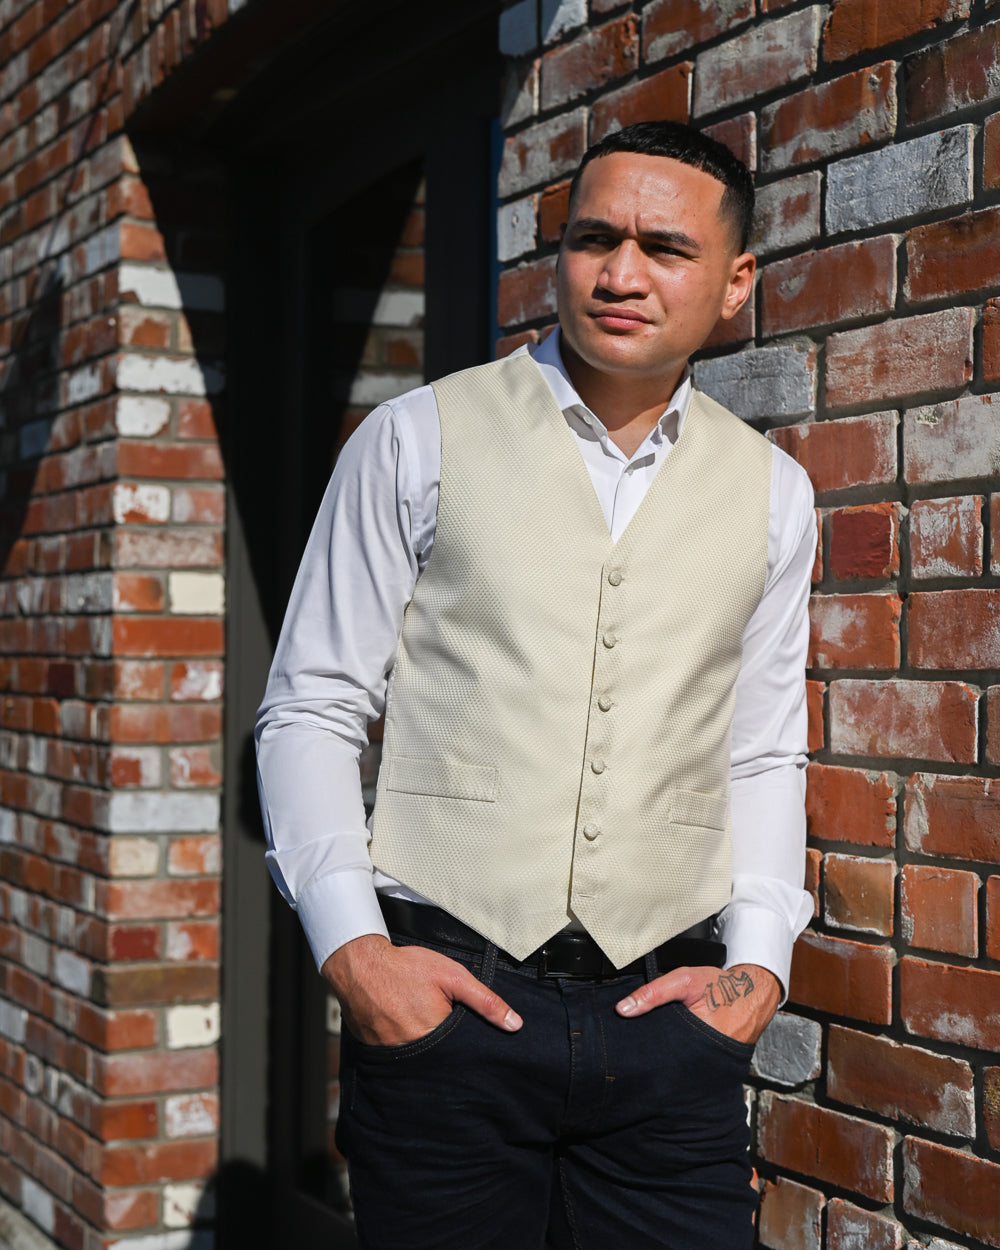 Handsome young Samoan man wearing a textured cream waistcoat with a white shirt